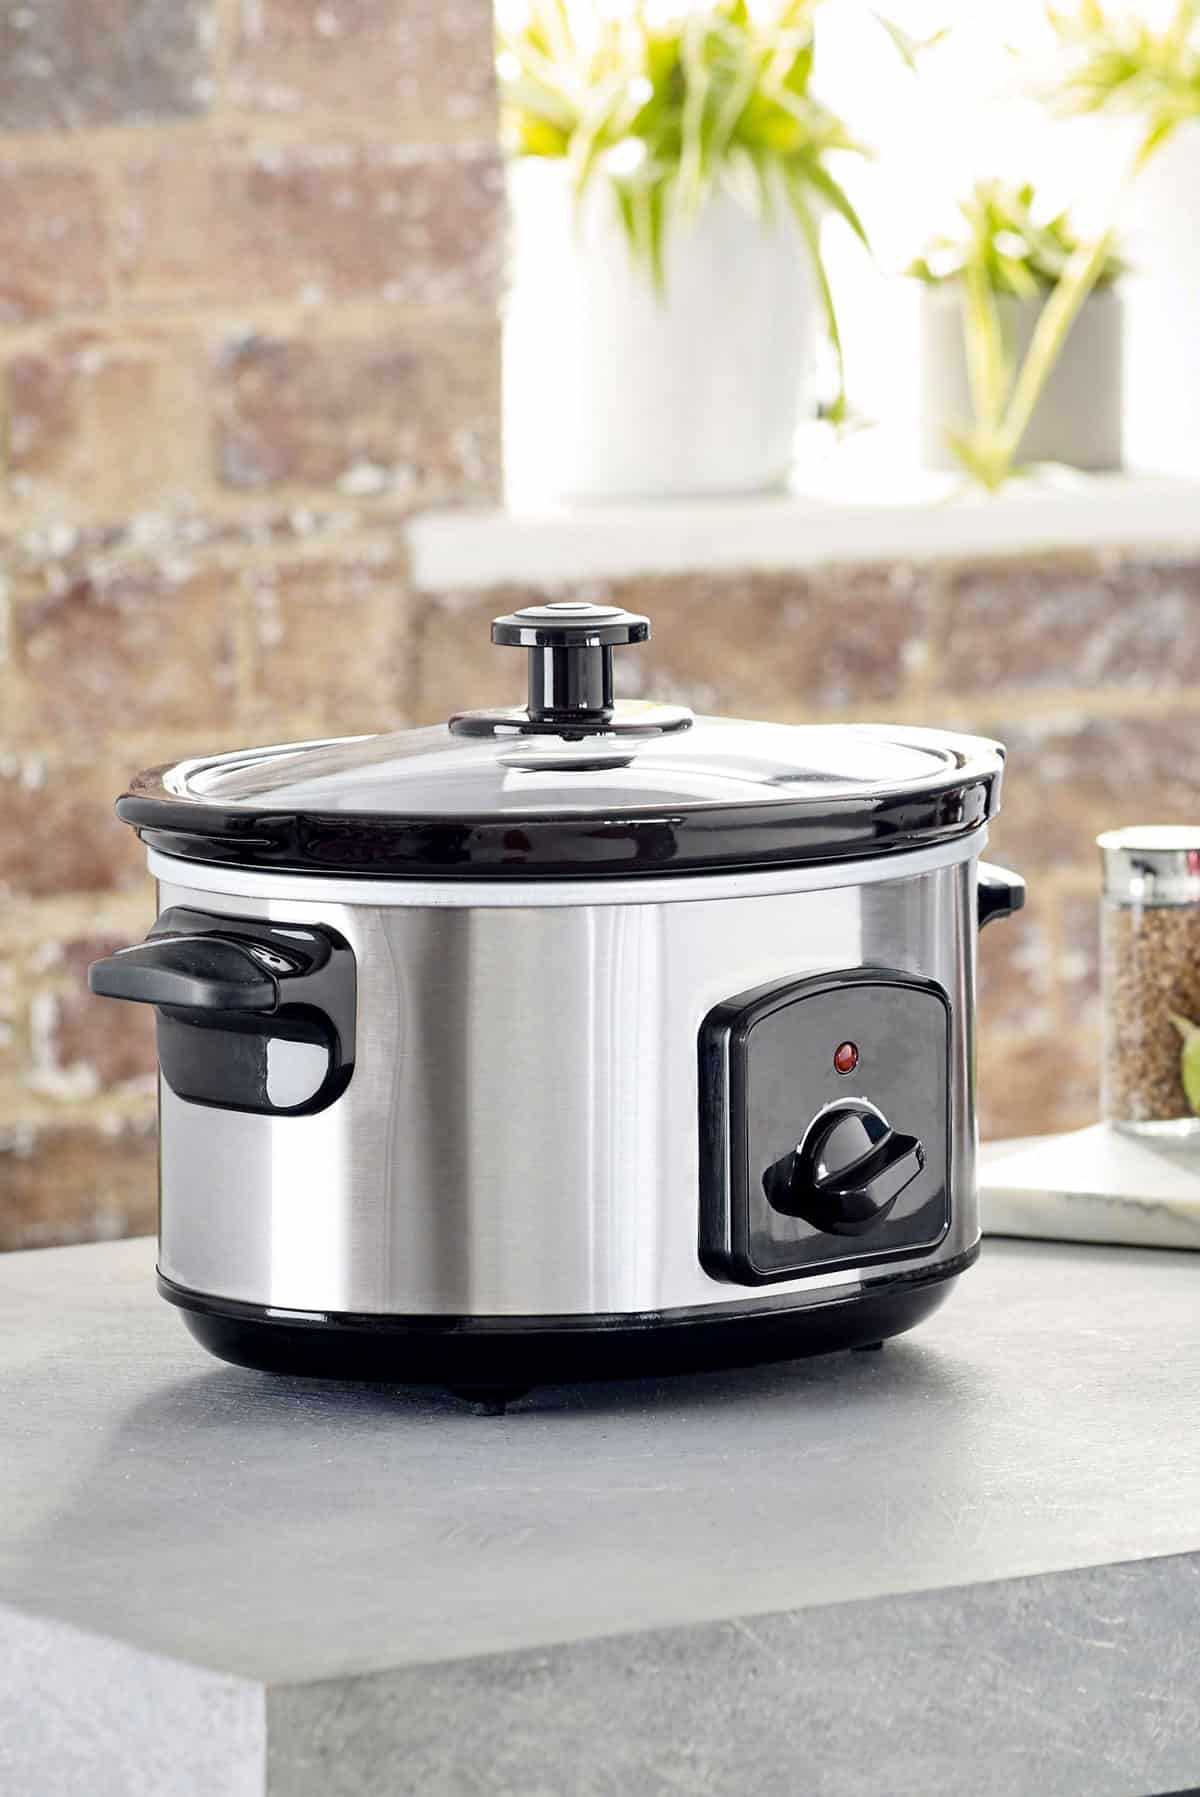 Slow cooker kitchen appliance on a counter top.